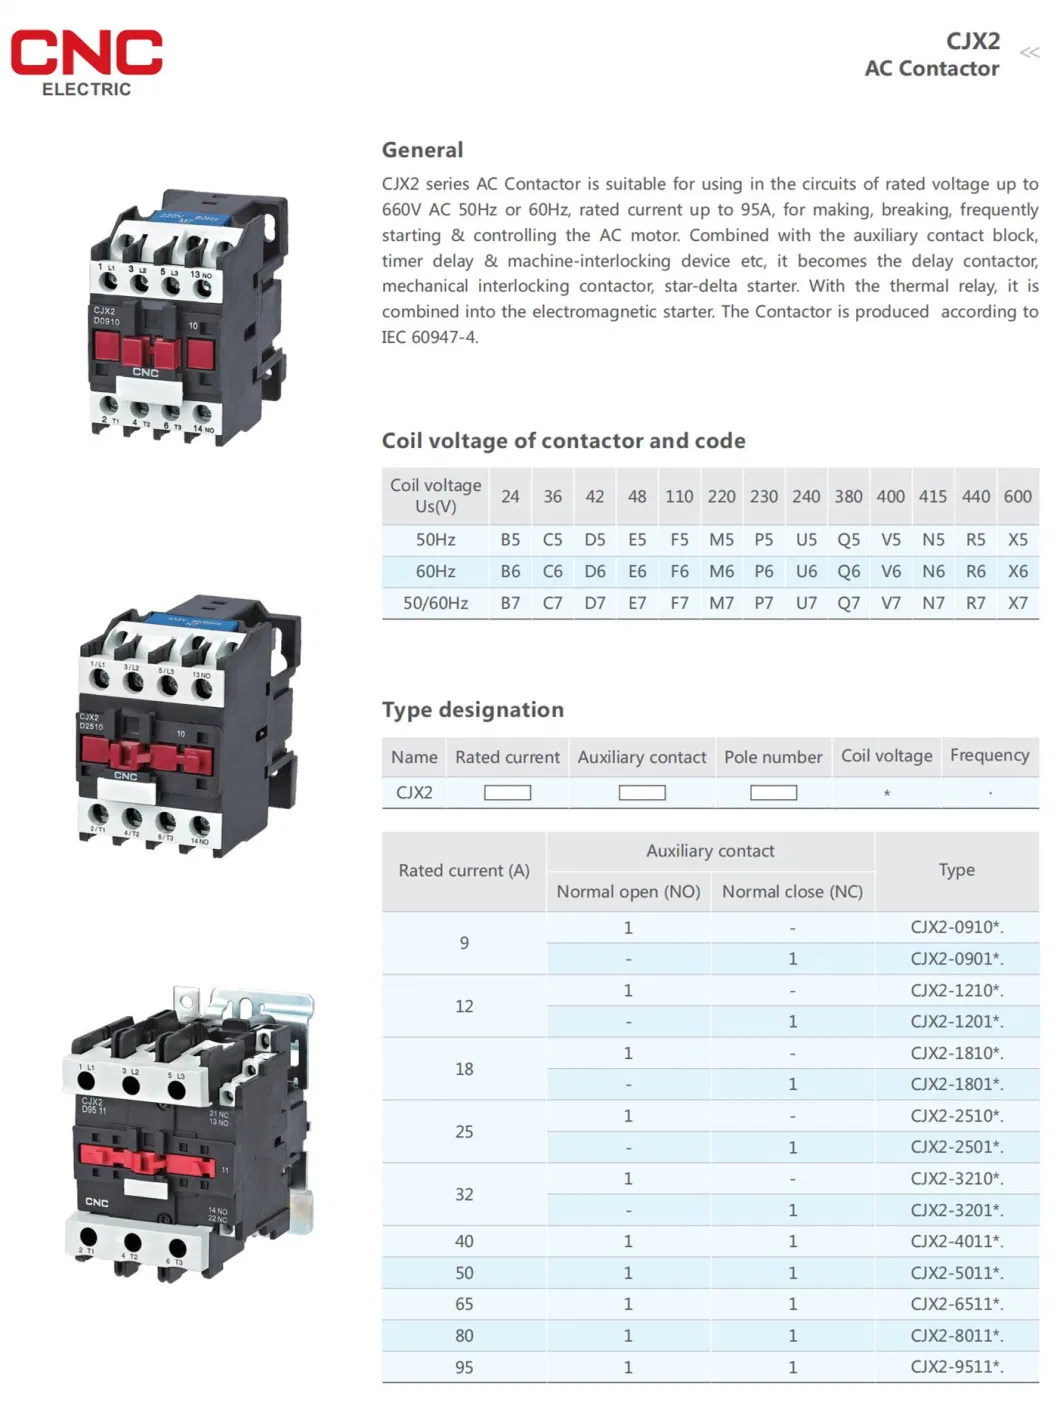 CNC 2021 Modern Design 3 Phase AC Contactors 3 Phase 80A 480V AC Contactor 3 Phase 50A Contactor